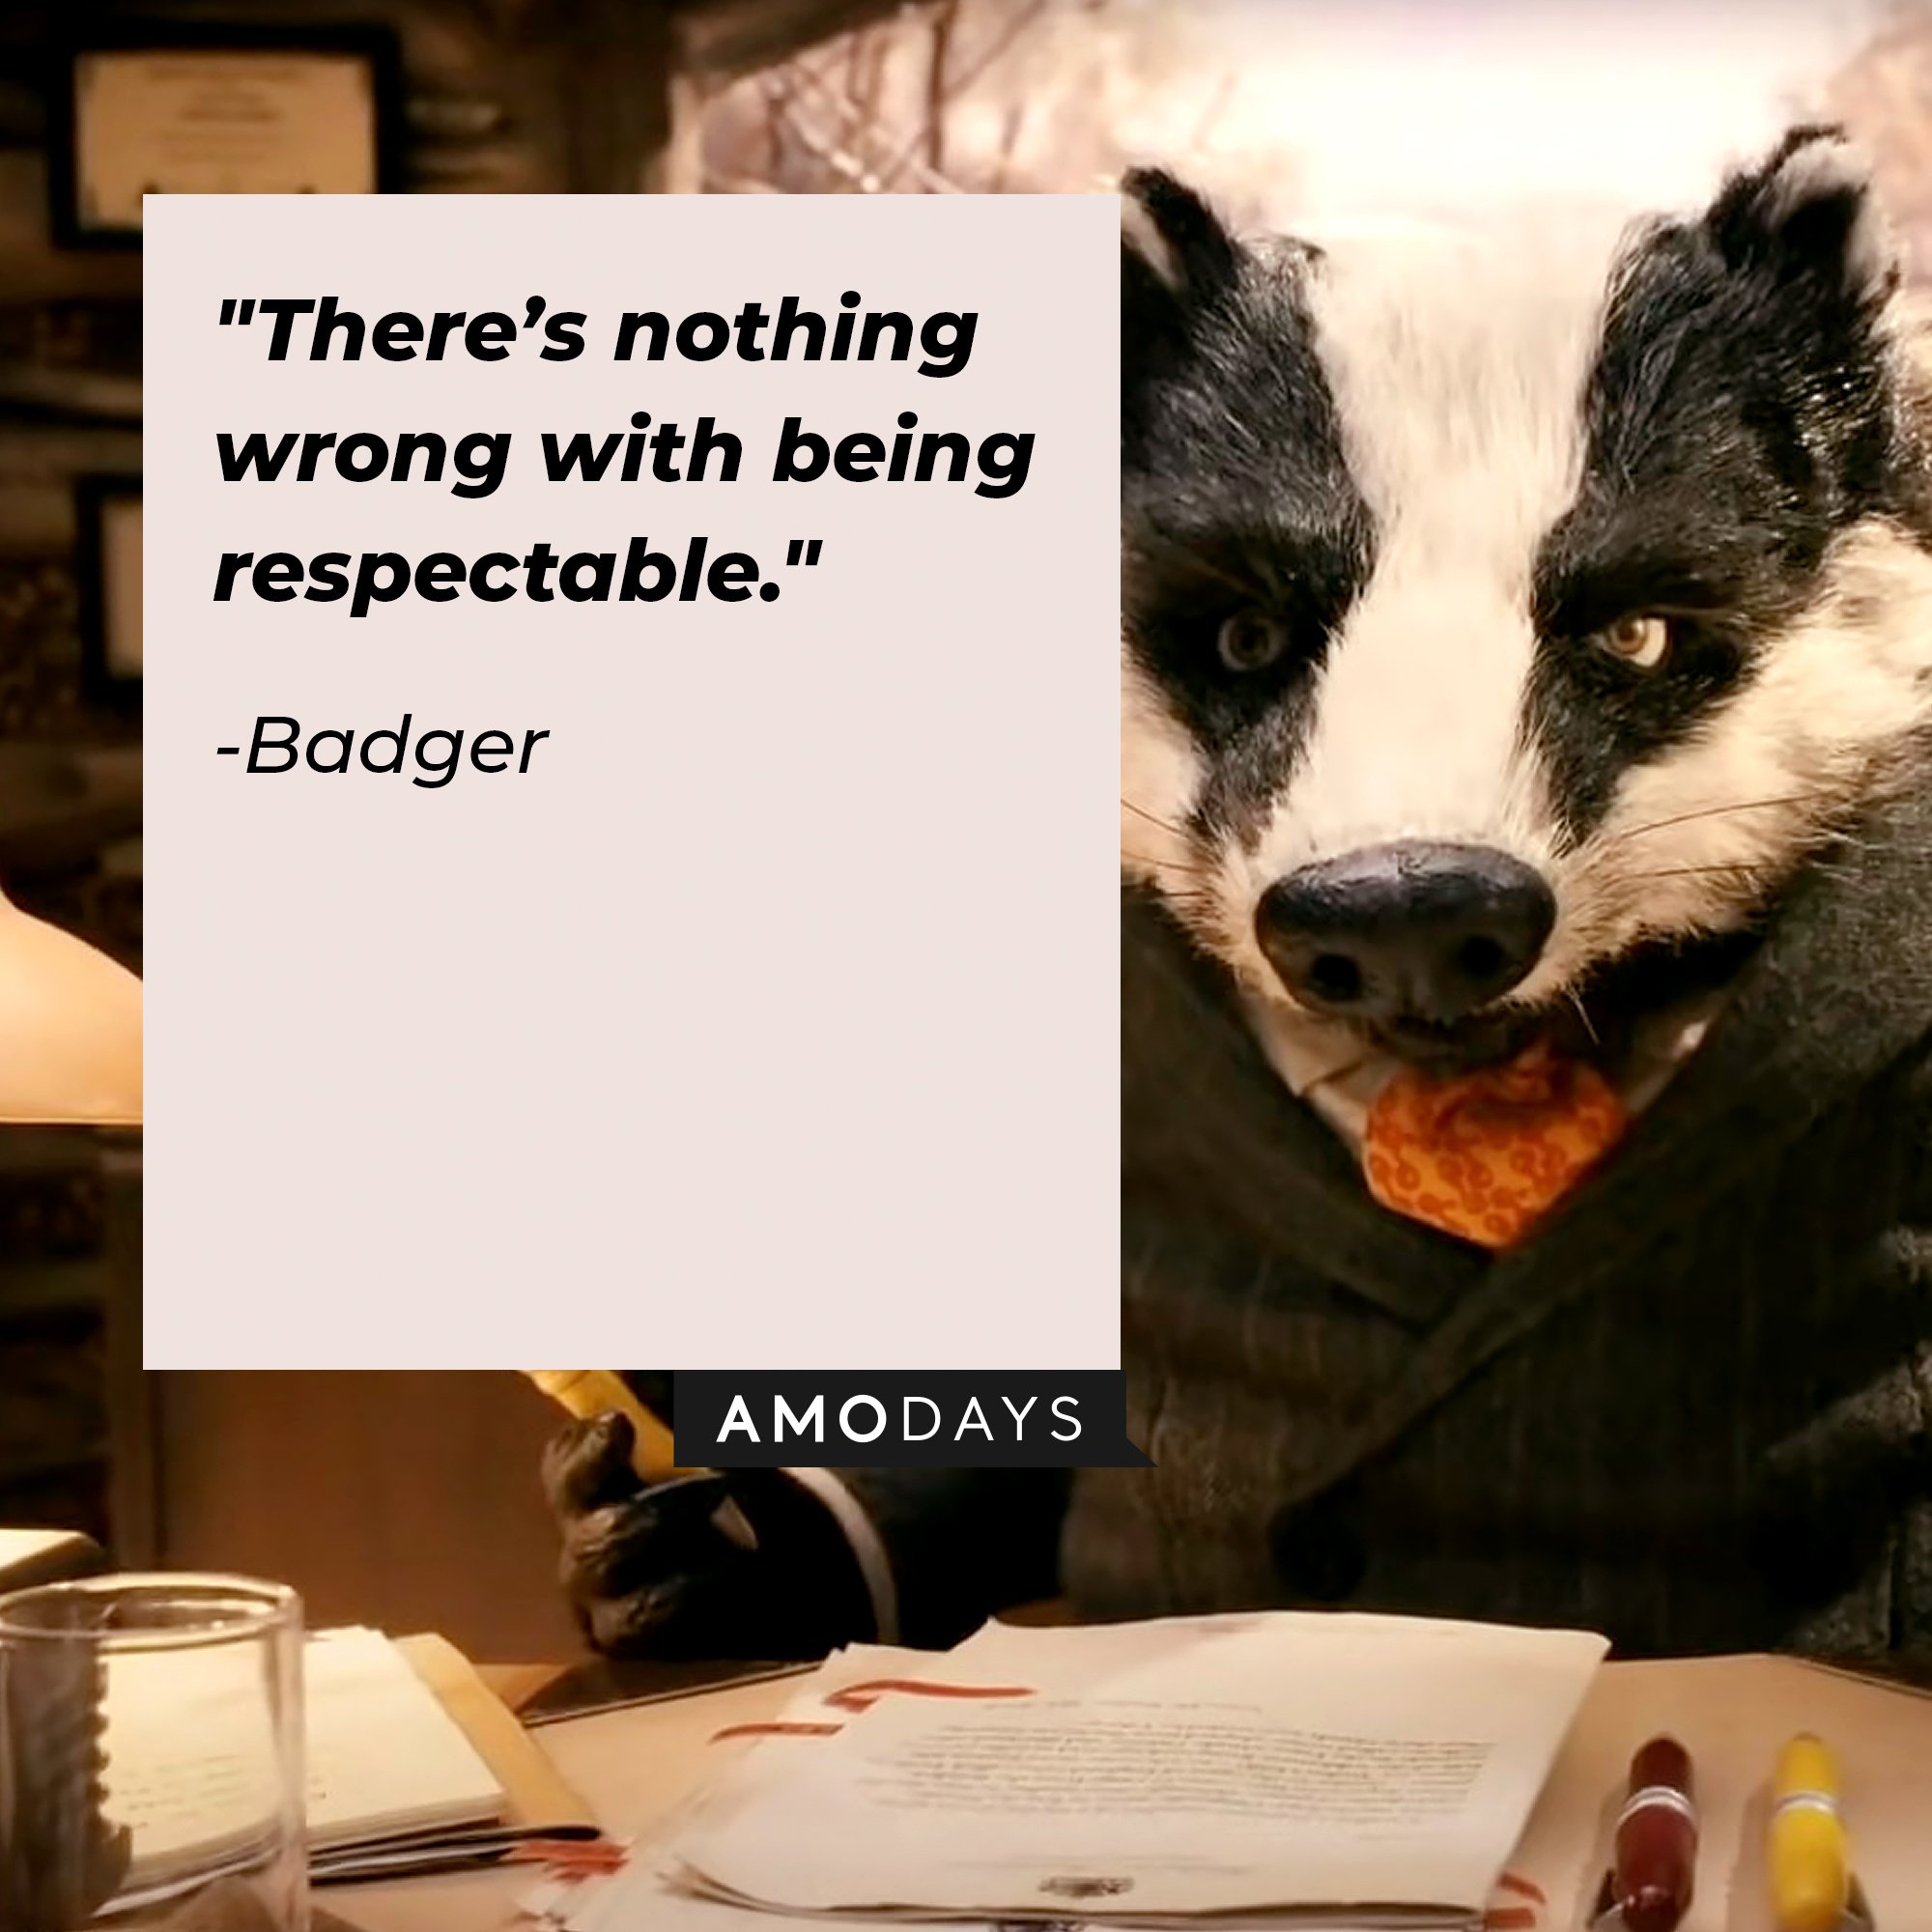 Badger’s Quote: ″There’s nothing wrong with being respectable." | Image: AmoDays